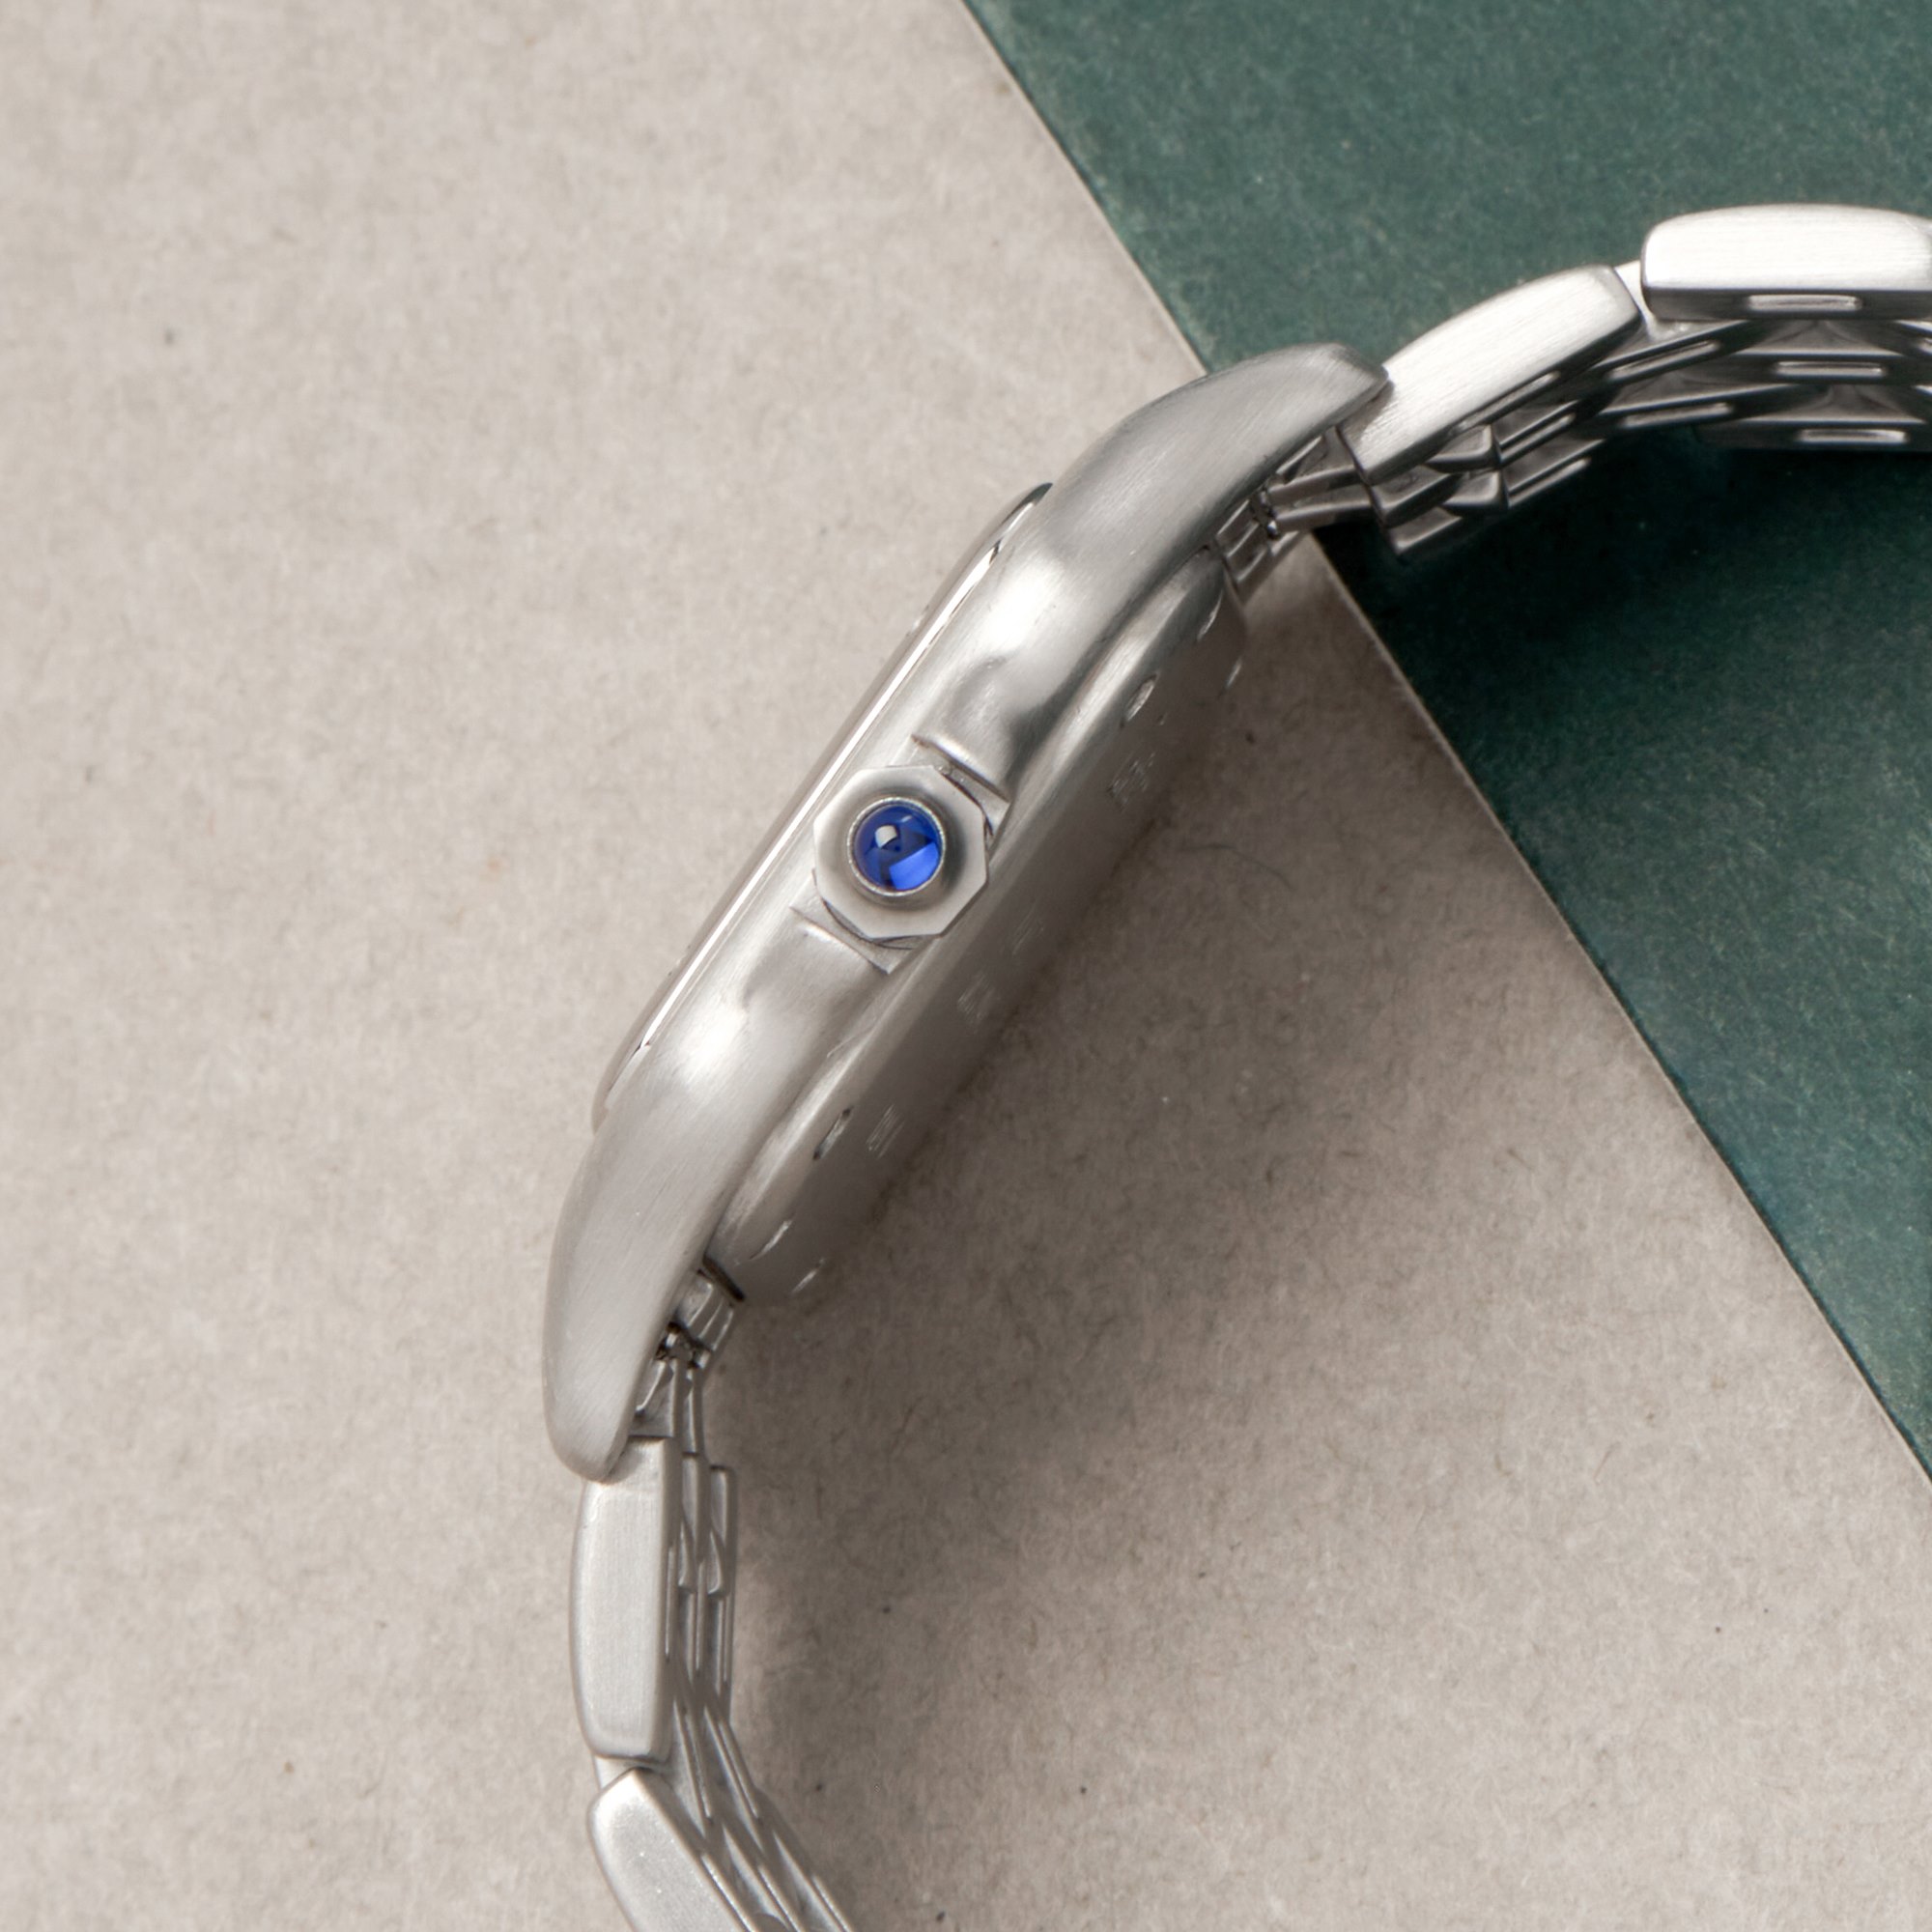 Cartier Panthère Stainless Steel W25033P5 or 1320